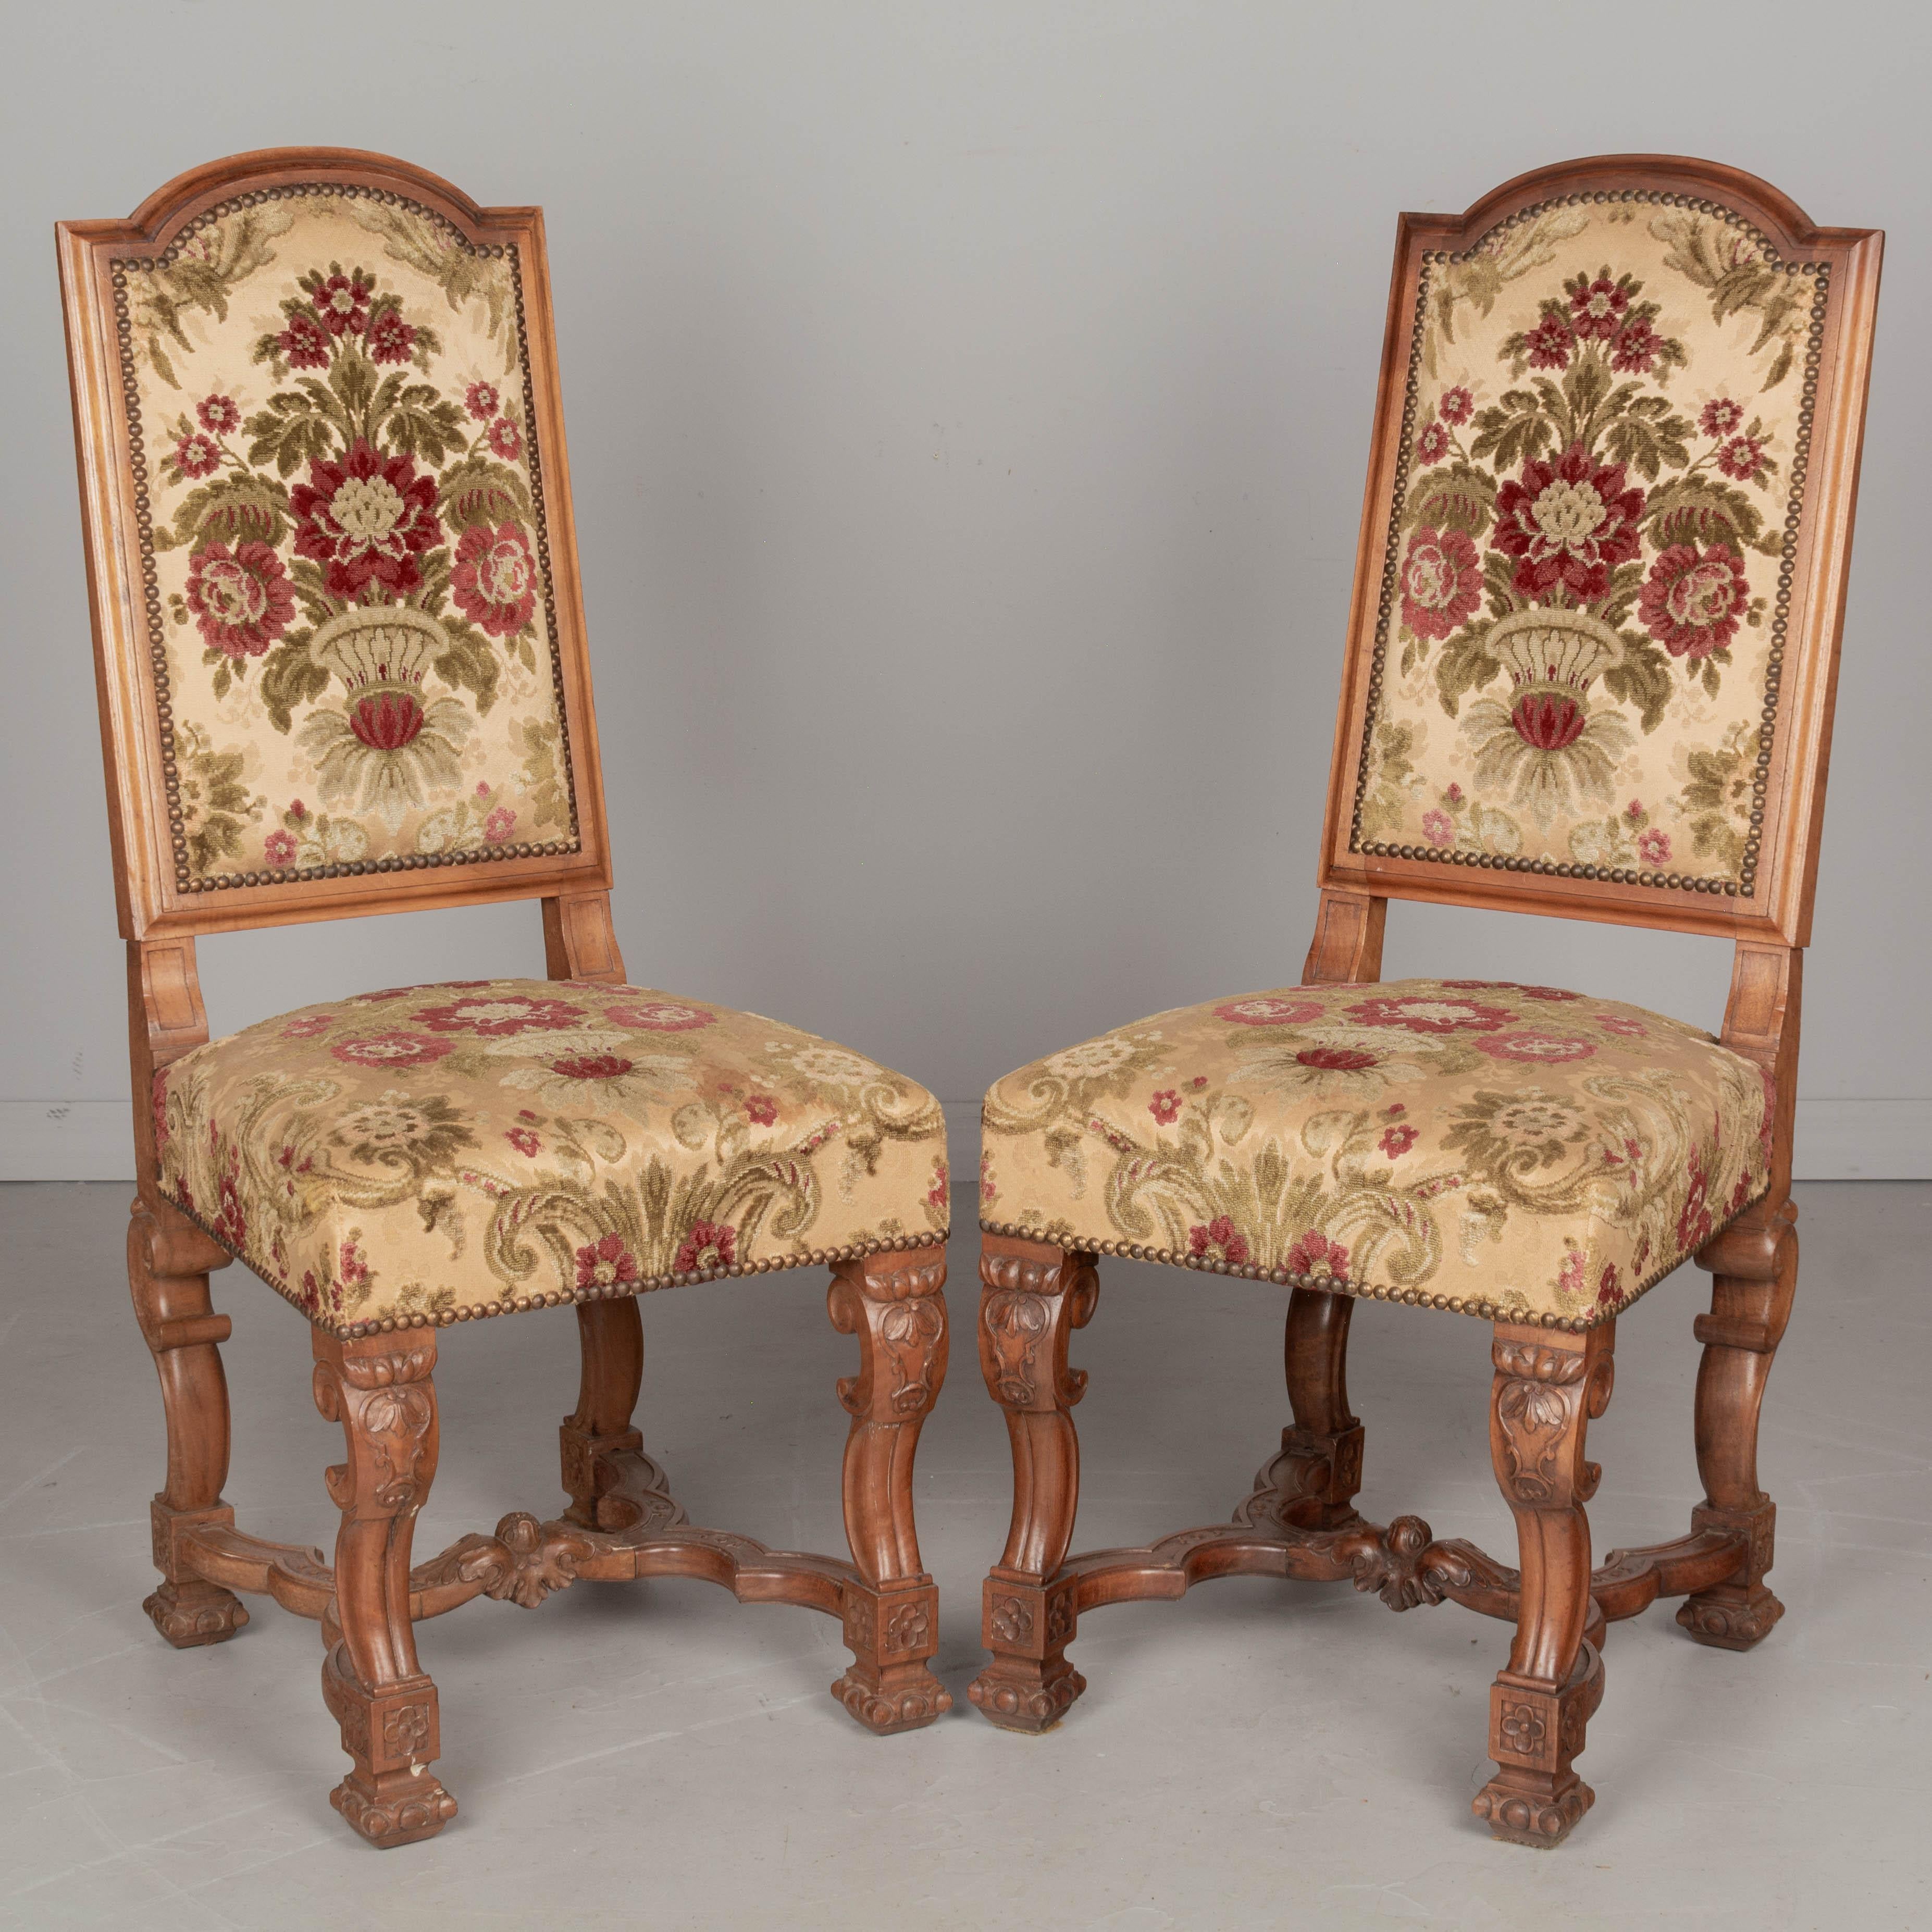 A set of eight French Louis XIII style dining chairs with solid walnut frames and original velvet brocade upholstery. Sturdy and well-constructed with tall back, carved legs and stretchers. Fabric is in good condition, with the exception of two